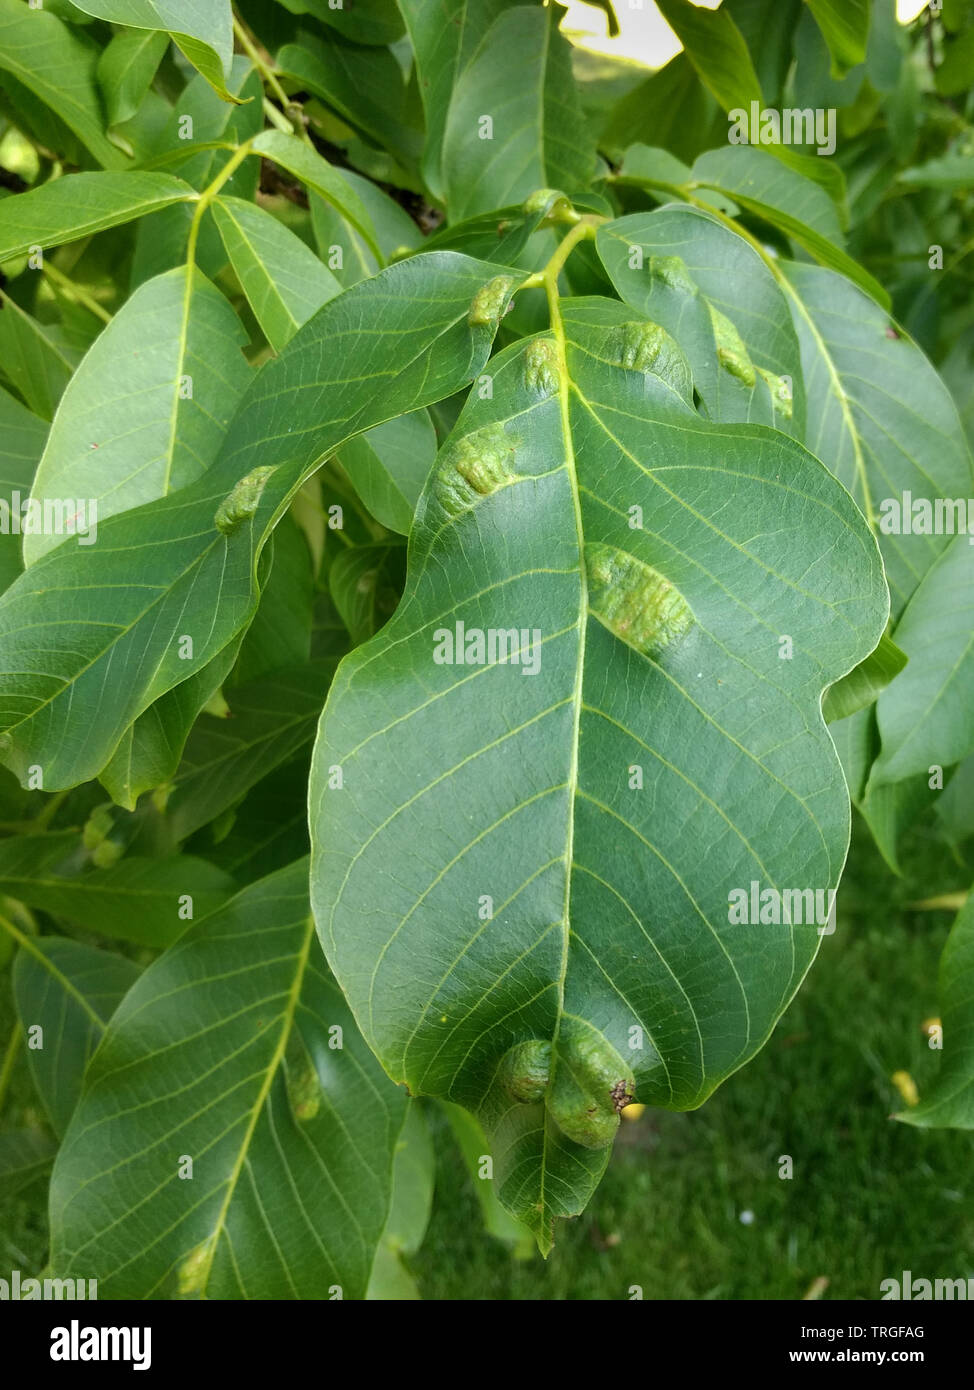 Bumps on the leaves of a walnut tree caused by walnut blister mites (Phytotus tristriatus) Stock Photo